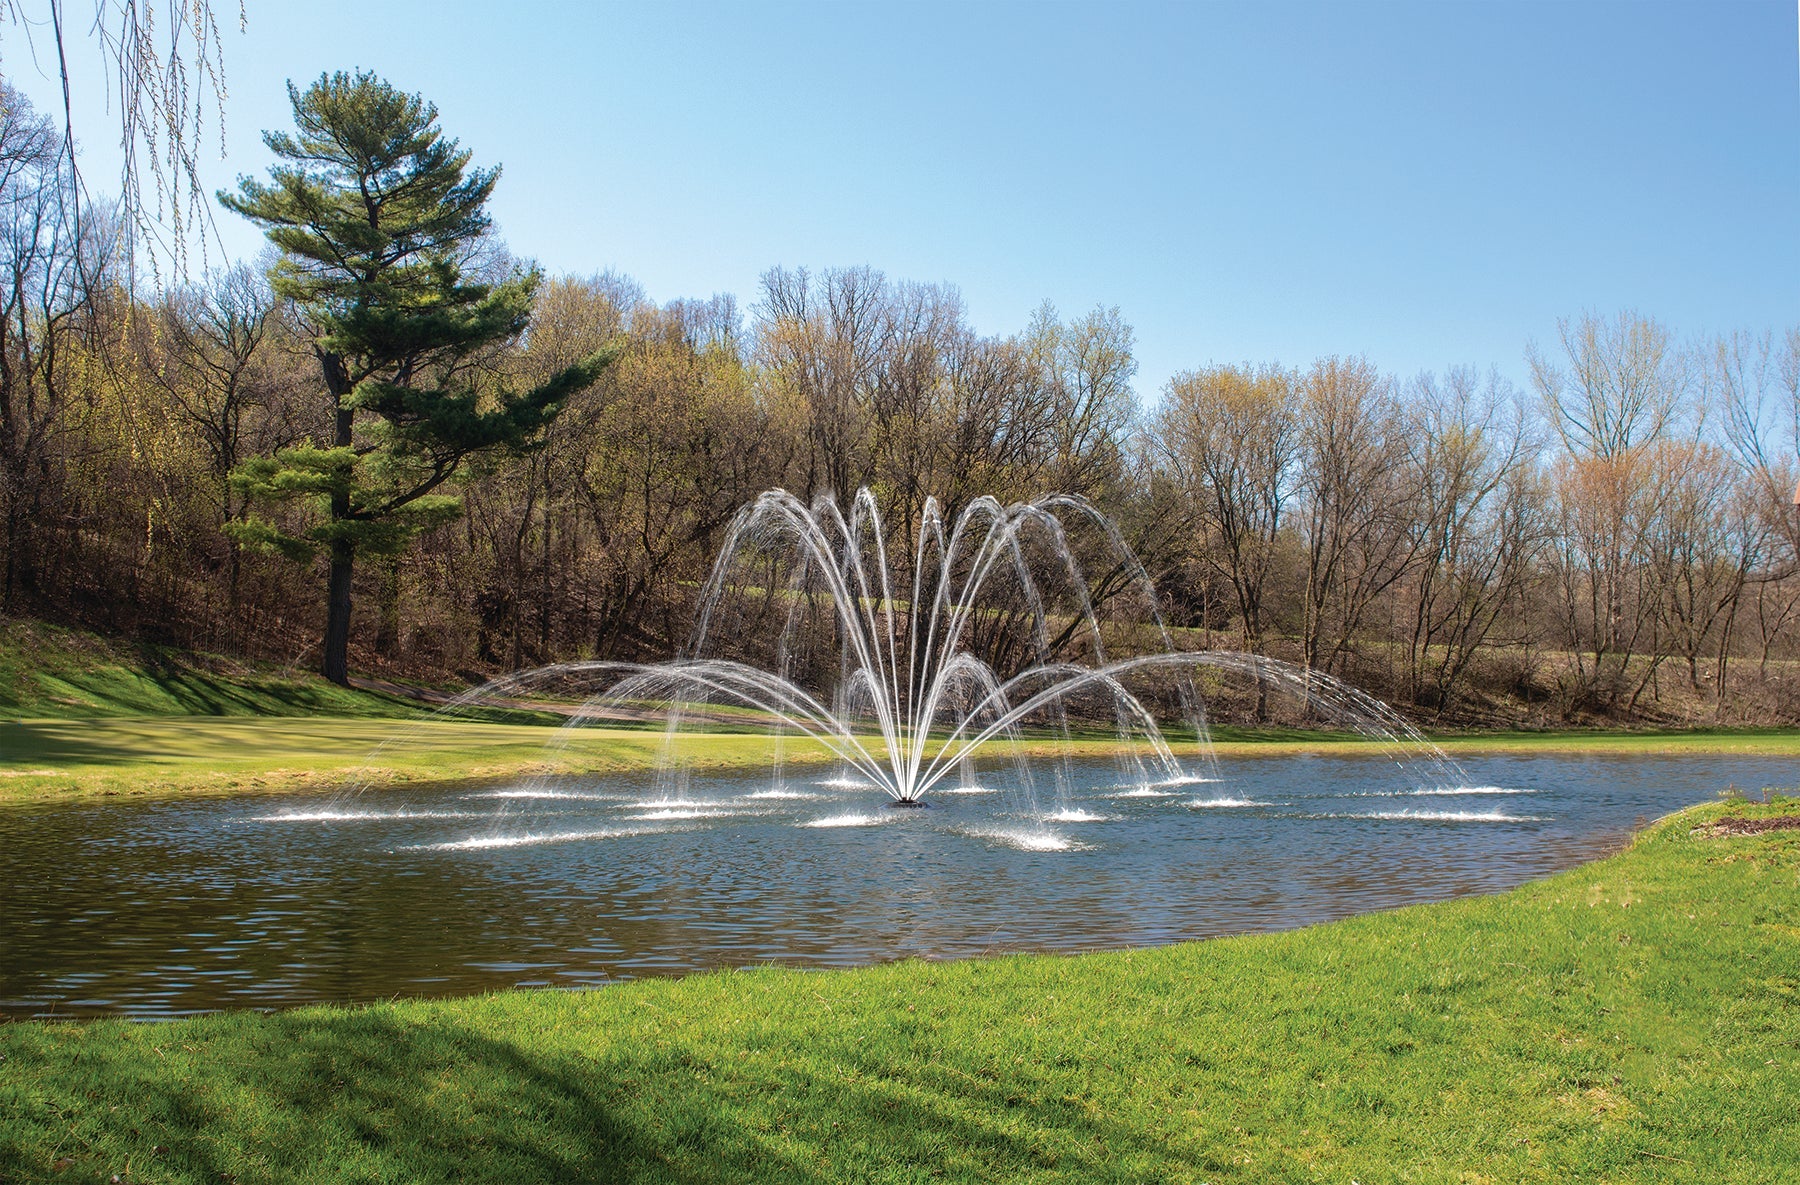 Photo of Kasco J Series Floating Fountains - Premium Nozzles Only - Marquis Gardens